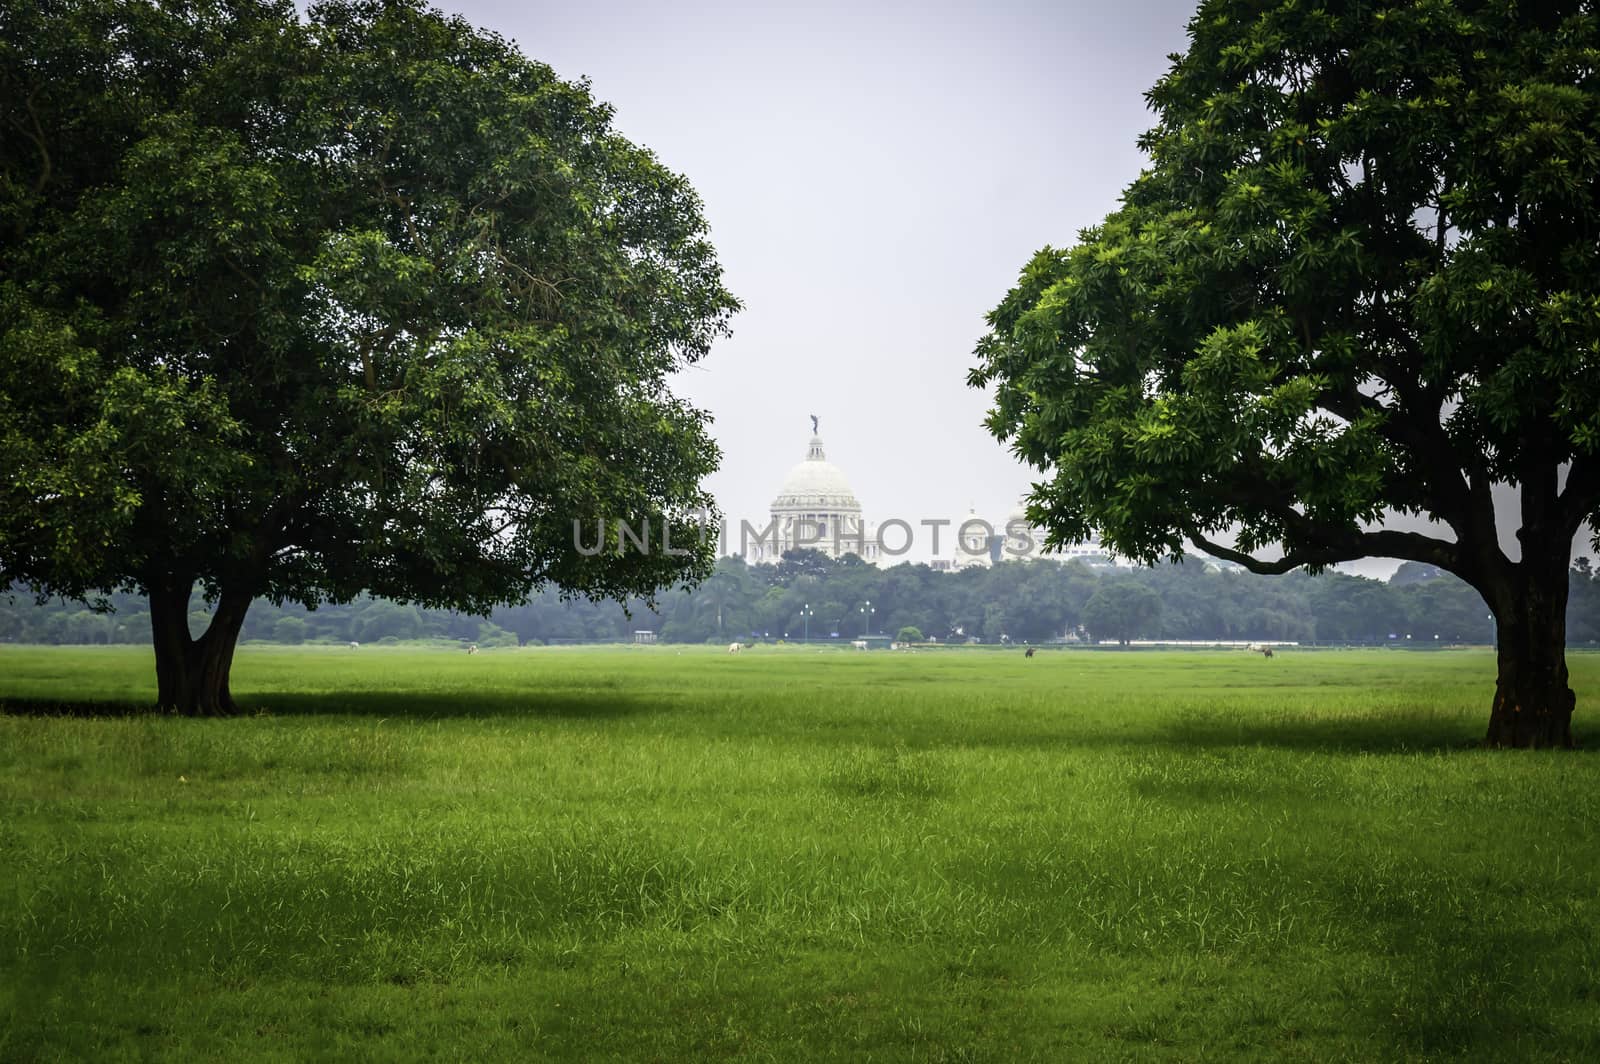 Beautiful image of Victoria Memorial snap from distance, from Moidan, Kolkata , Calcutta, West Bengal, India. by sudiptabhowmick